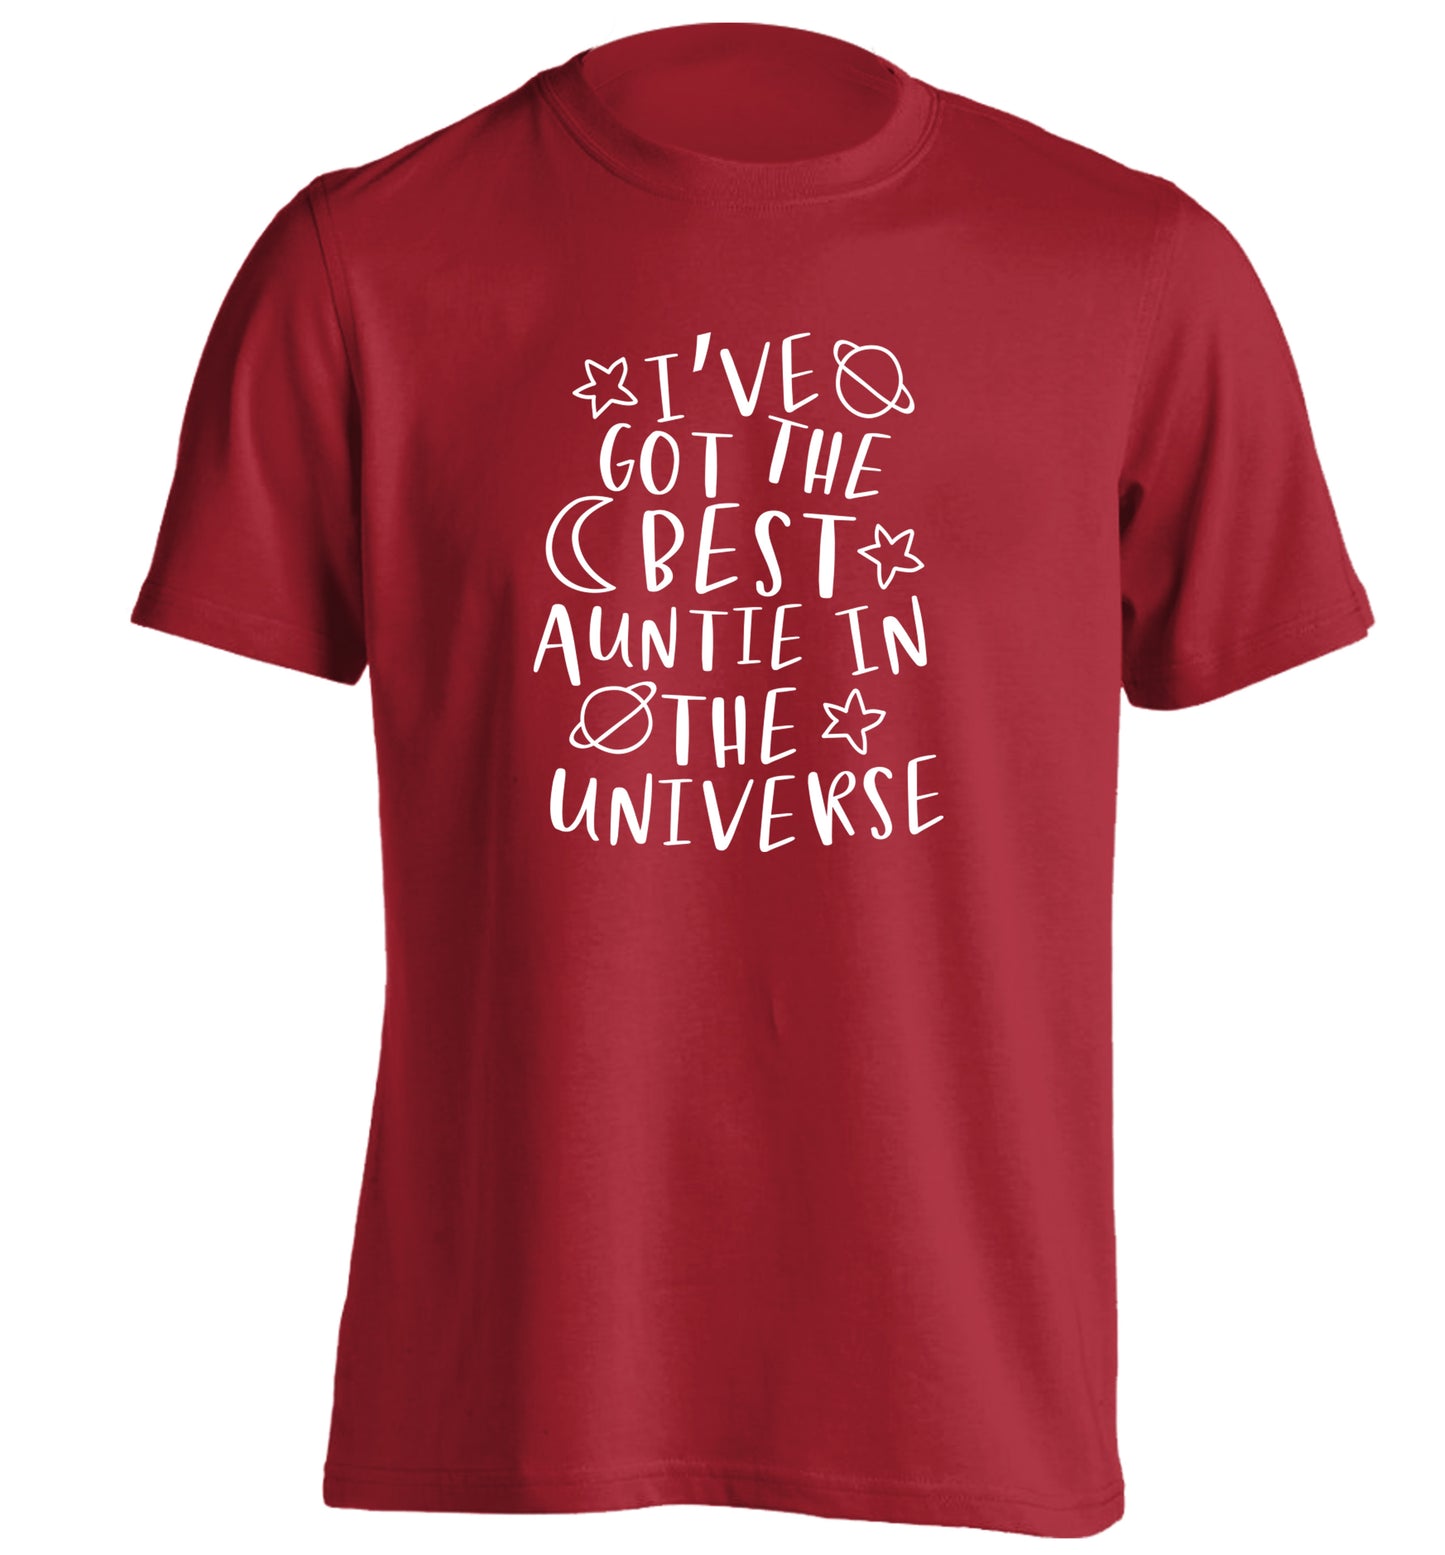 I've got the best auntie in the universe adults unisex red Tshirt 2XL